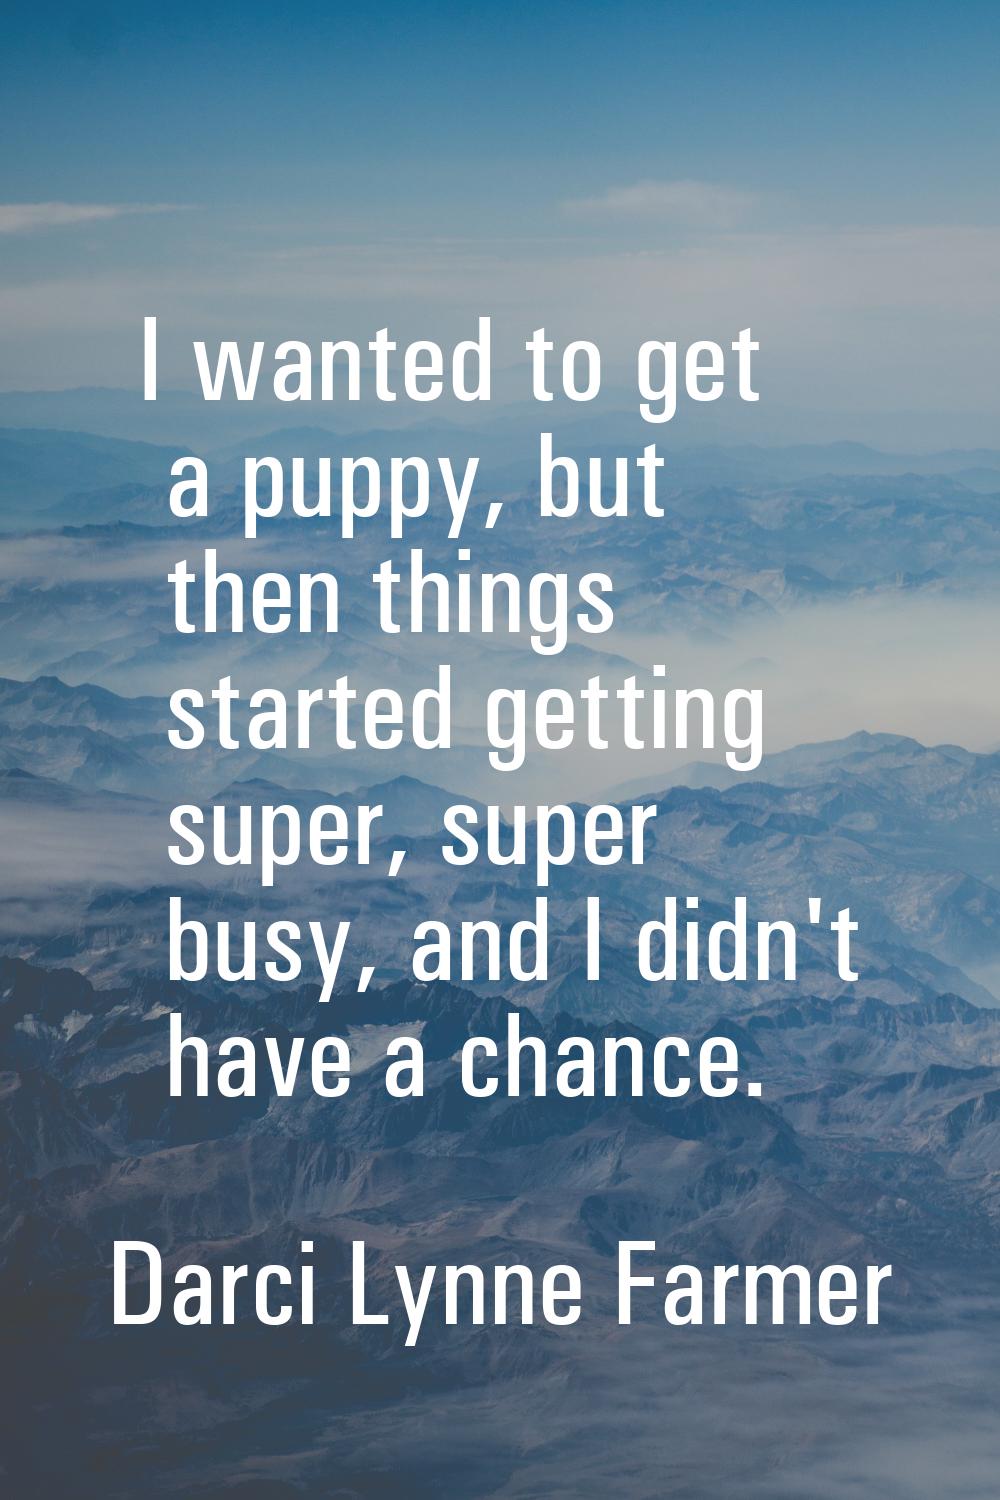 I wanted to get a puppy, but then things started getting super, super busy, and I didn't have a cha